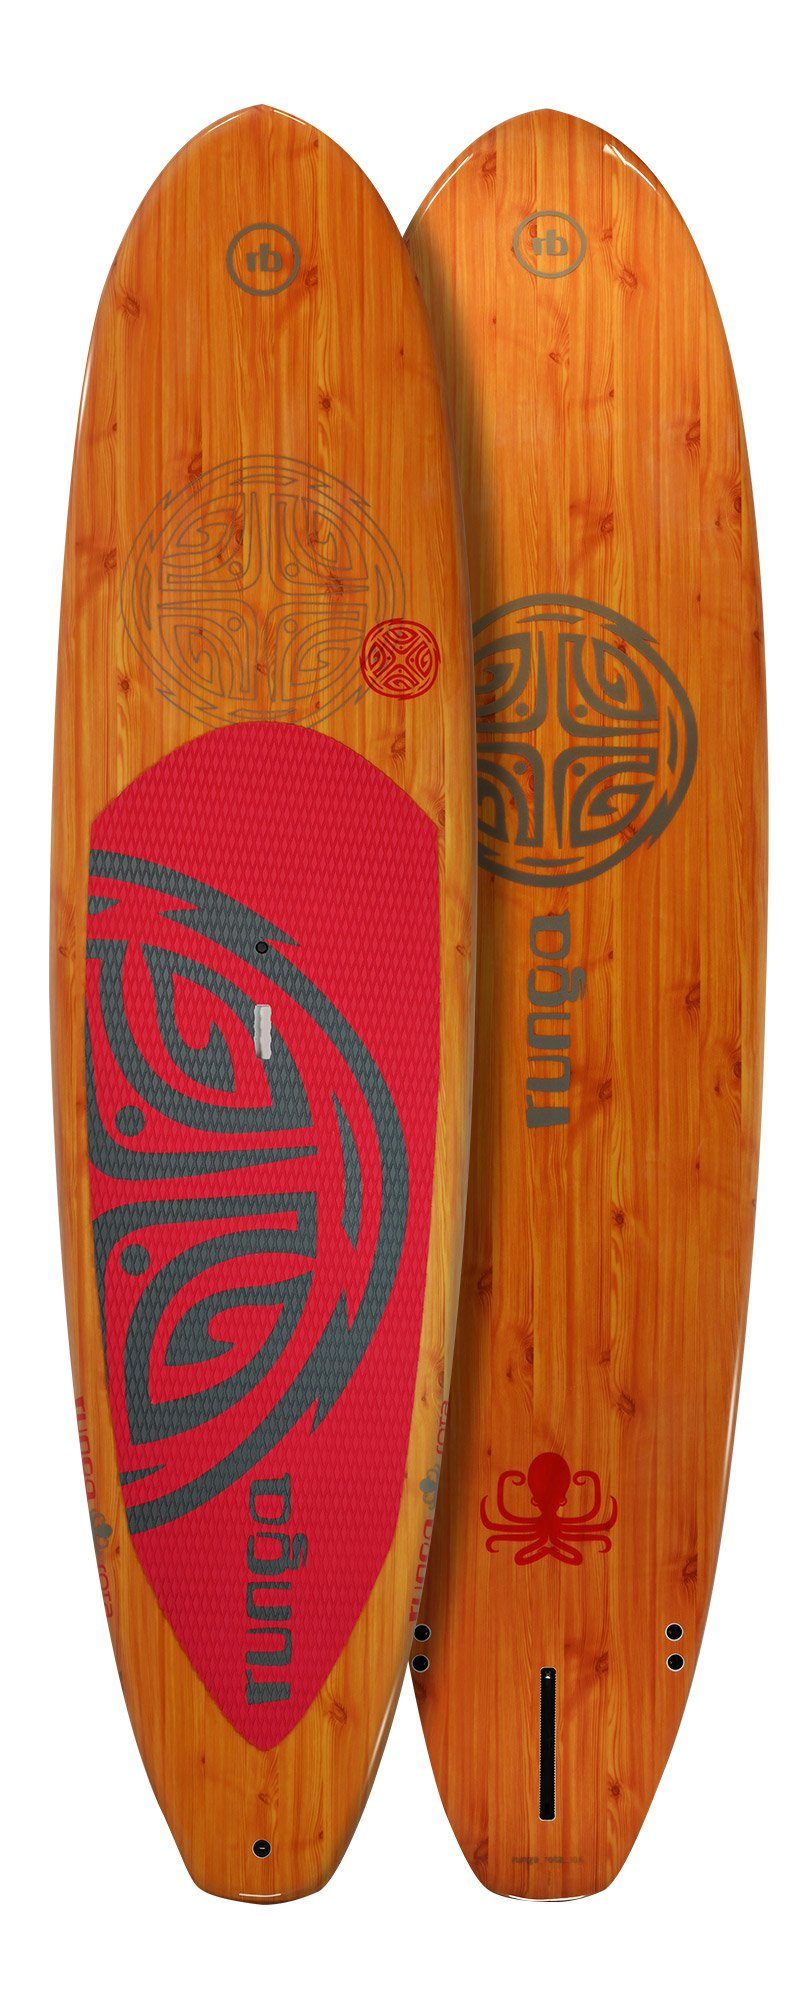 Runga-Boards SUP-Board ROTA Up Board Stand (9.6, Paddling 3-tlg. RED Allrounder, Inkl. SUP, Hard Finnen-Set) coiled & leash